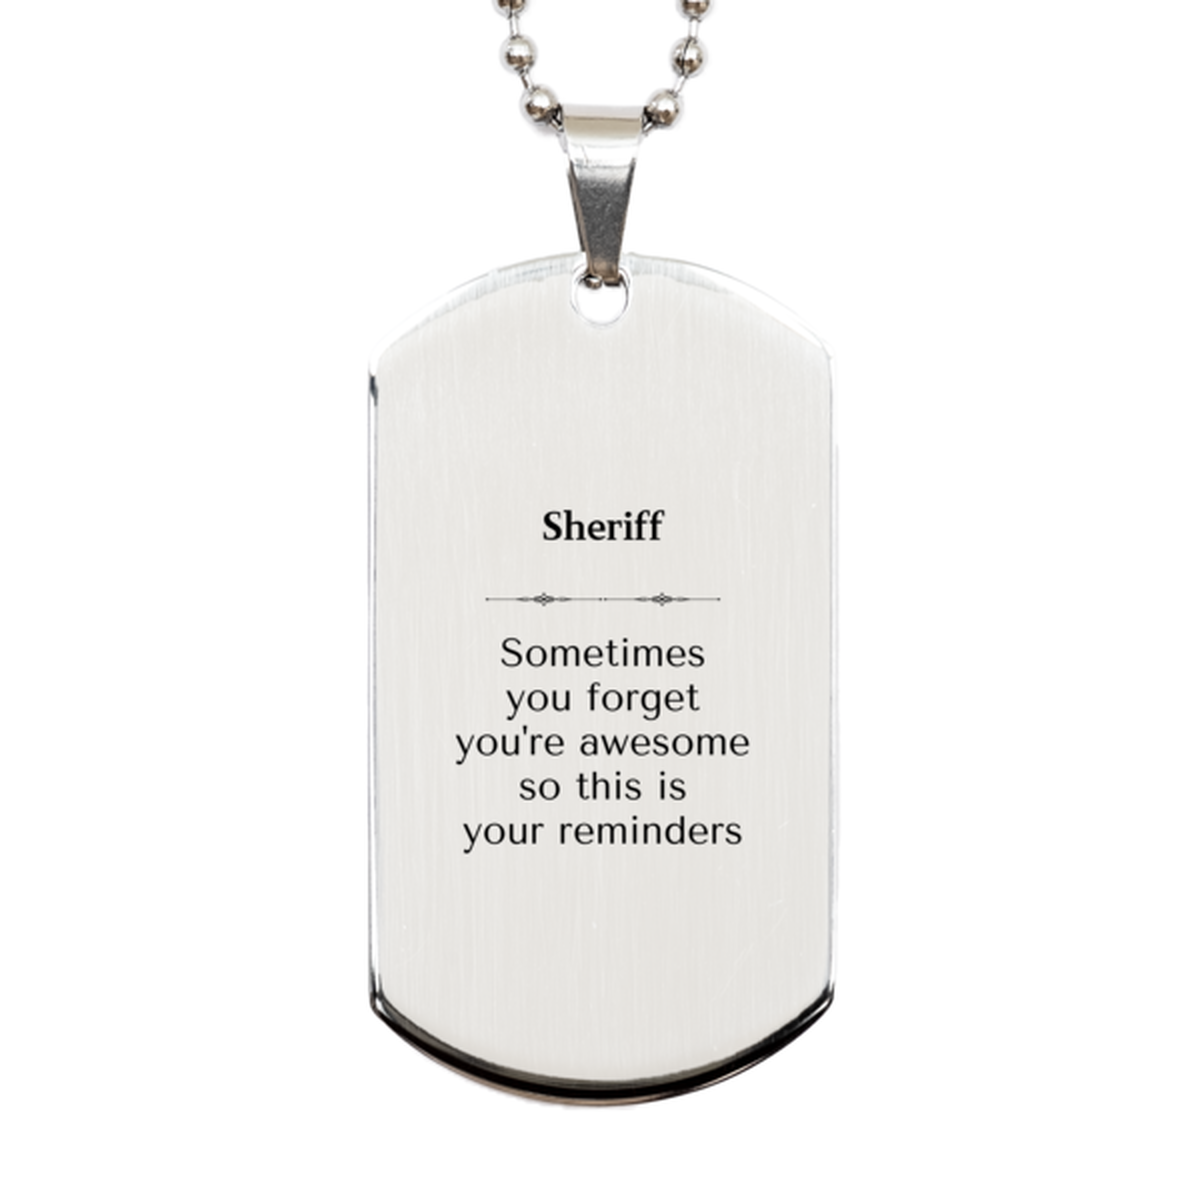 Sentimental Sheriff Silver Dog Tag, Sheriff Sometimes you forget you're awesome so this is your reminders, Graduation Christmas Birthday Gifts for Sheriff, Men, Women, Coworkers